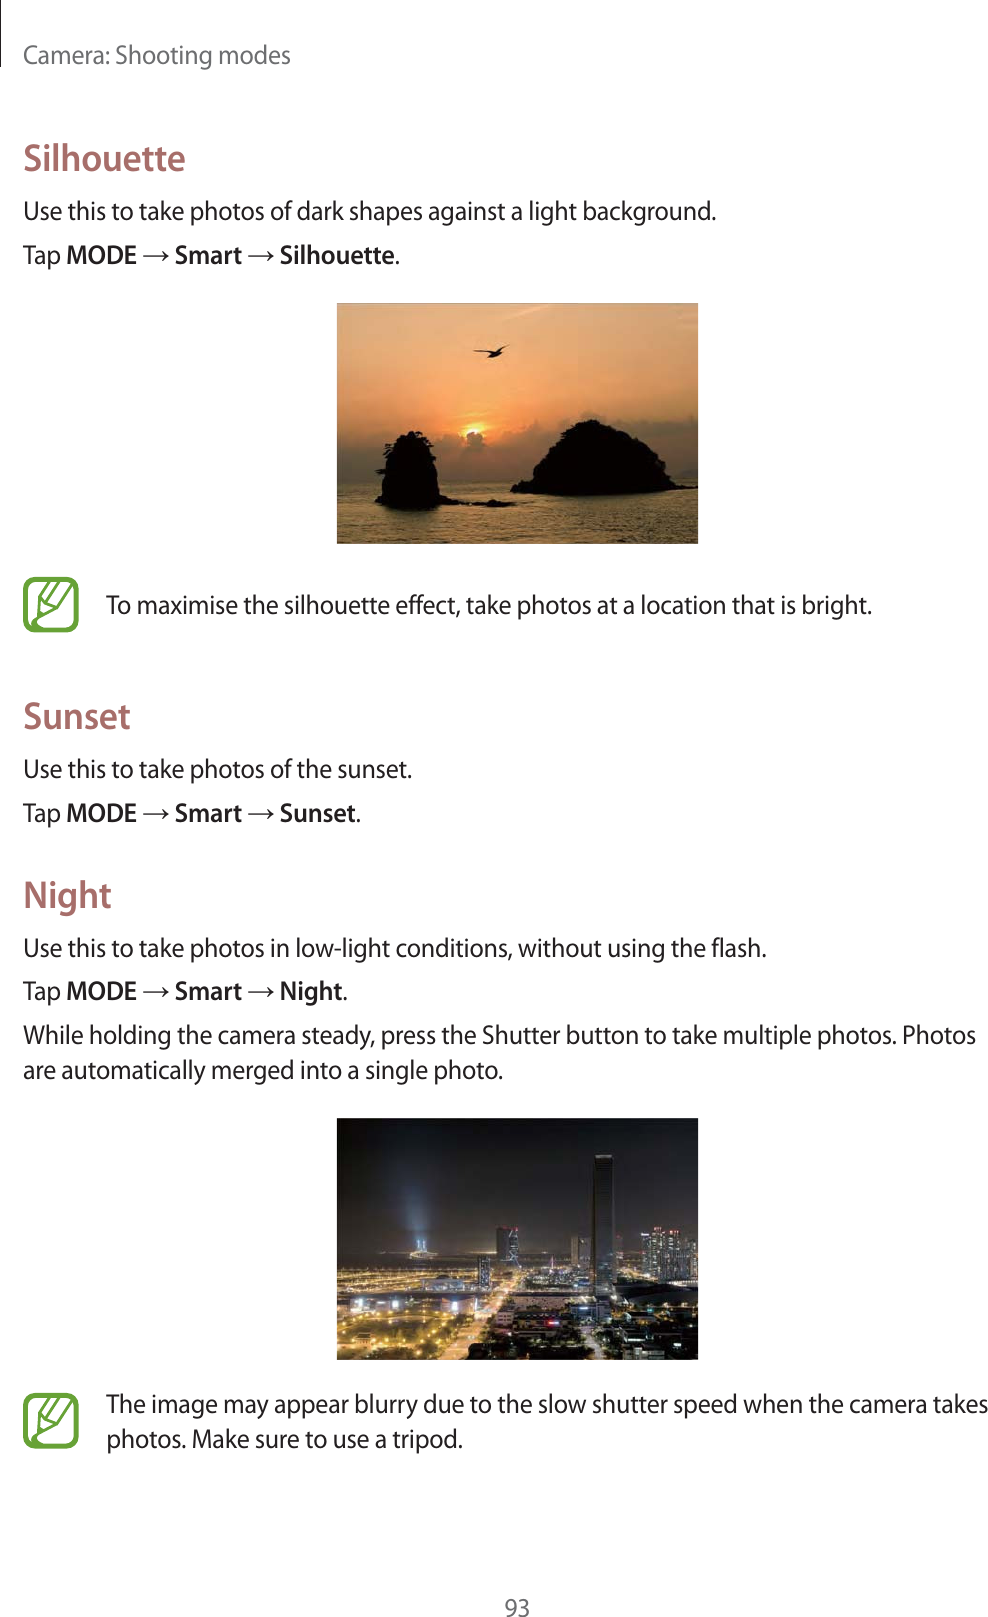 Camera: Shooting modes93SilhouetteUse this to take photos of dark shapes against a light background.Tap MODE  Smart  Silhouette.To maximise the silhouette effect, take photos at a location that is bright.SunsetUse this to take photos of the sunset.Tap MODE  Smart  Sunset.NightUse this to take photos in low-light conditions, without using the flash.Tap MODE  Smart  Night.While holding the camera steady, press the Shutter button to take multiple photos. Photos are automatically merged into a single photo.The image may appear blurry due to the slow shutter speed when the camera takes photos. Make sure to use a tripod.